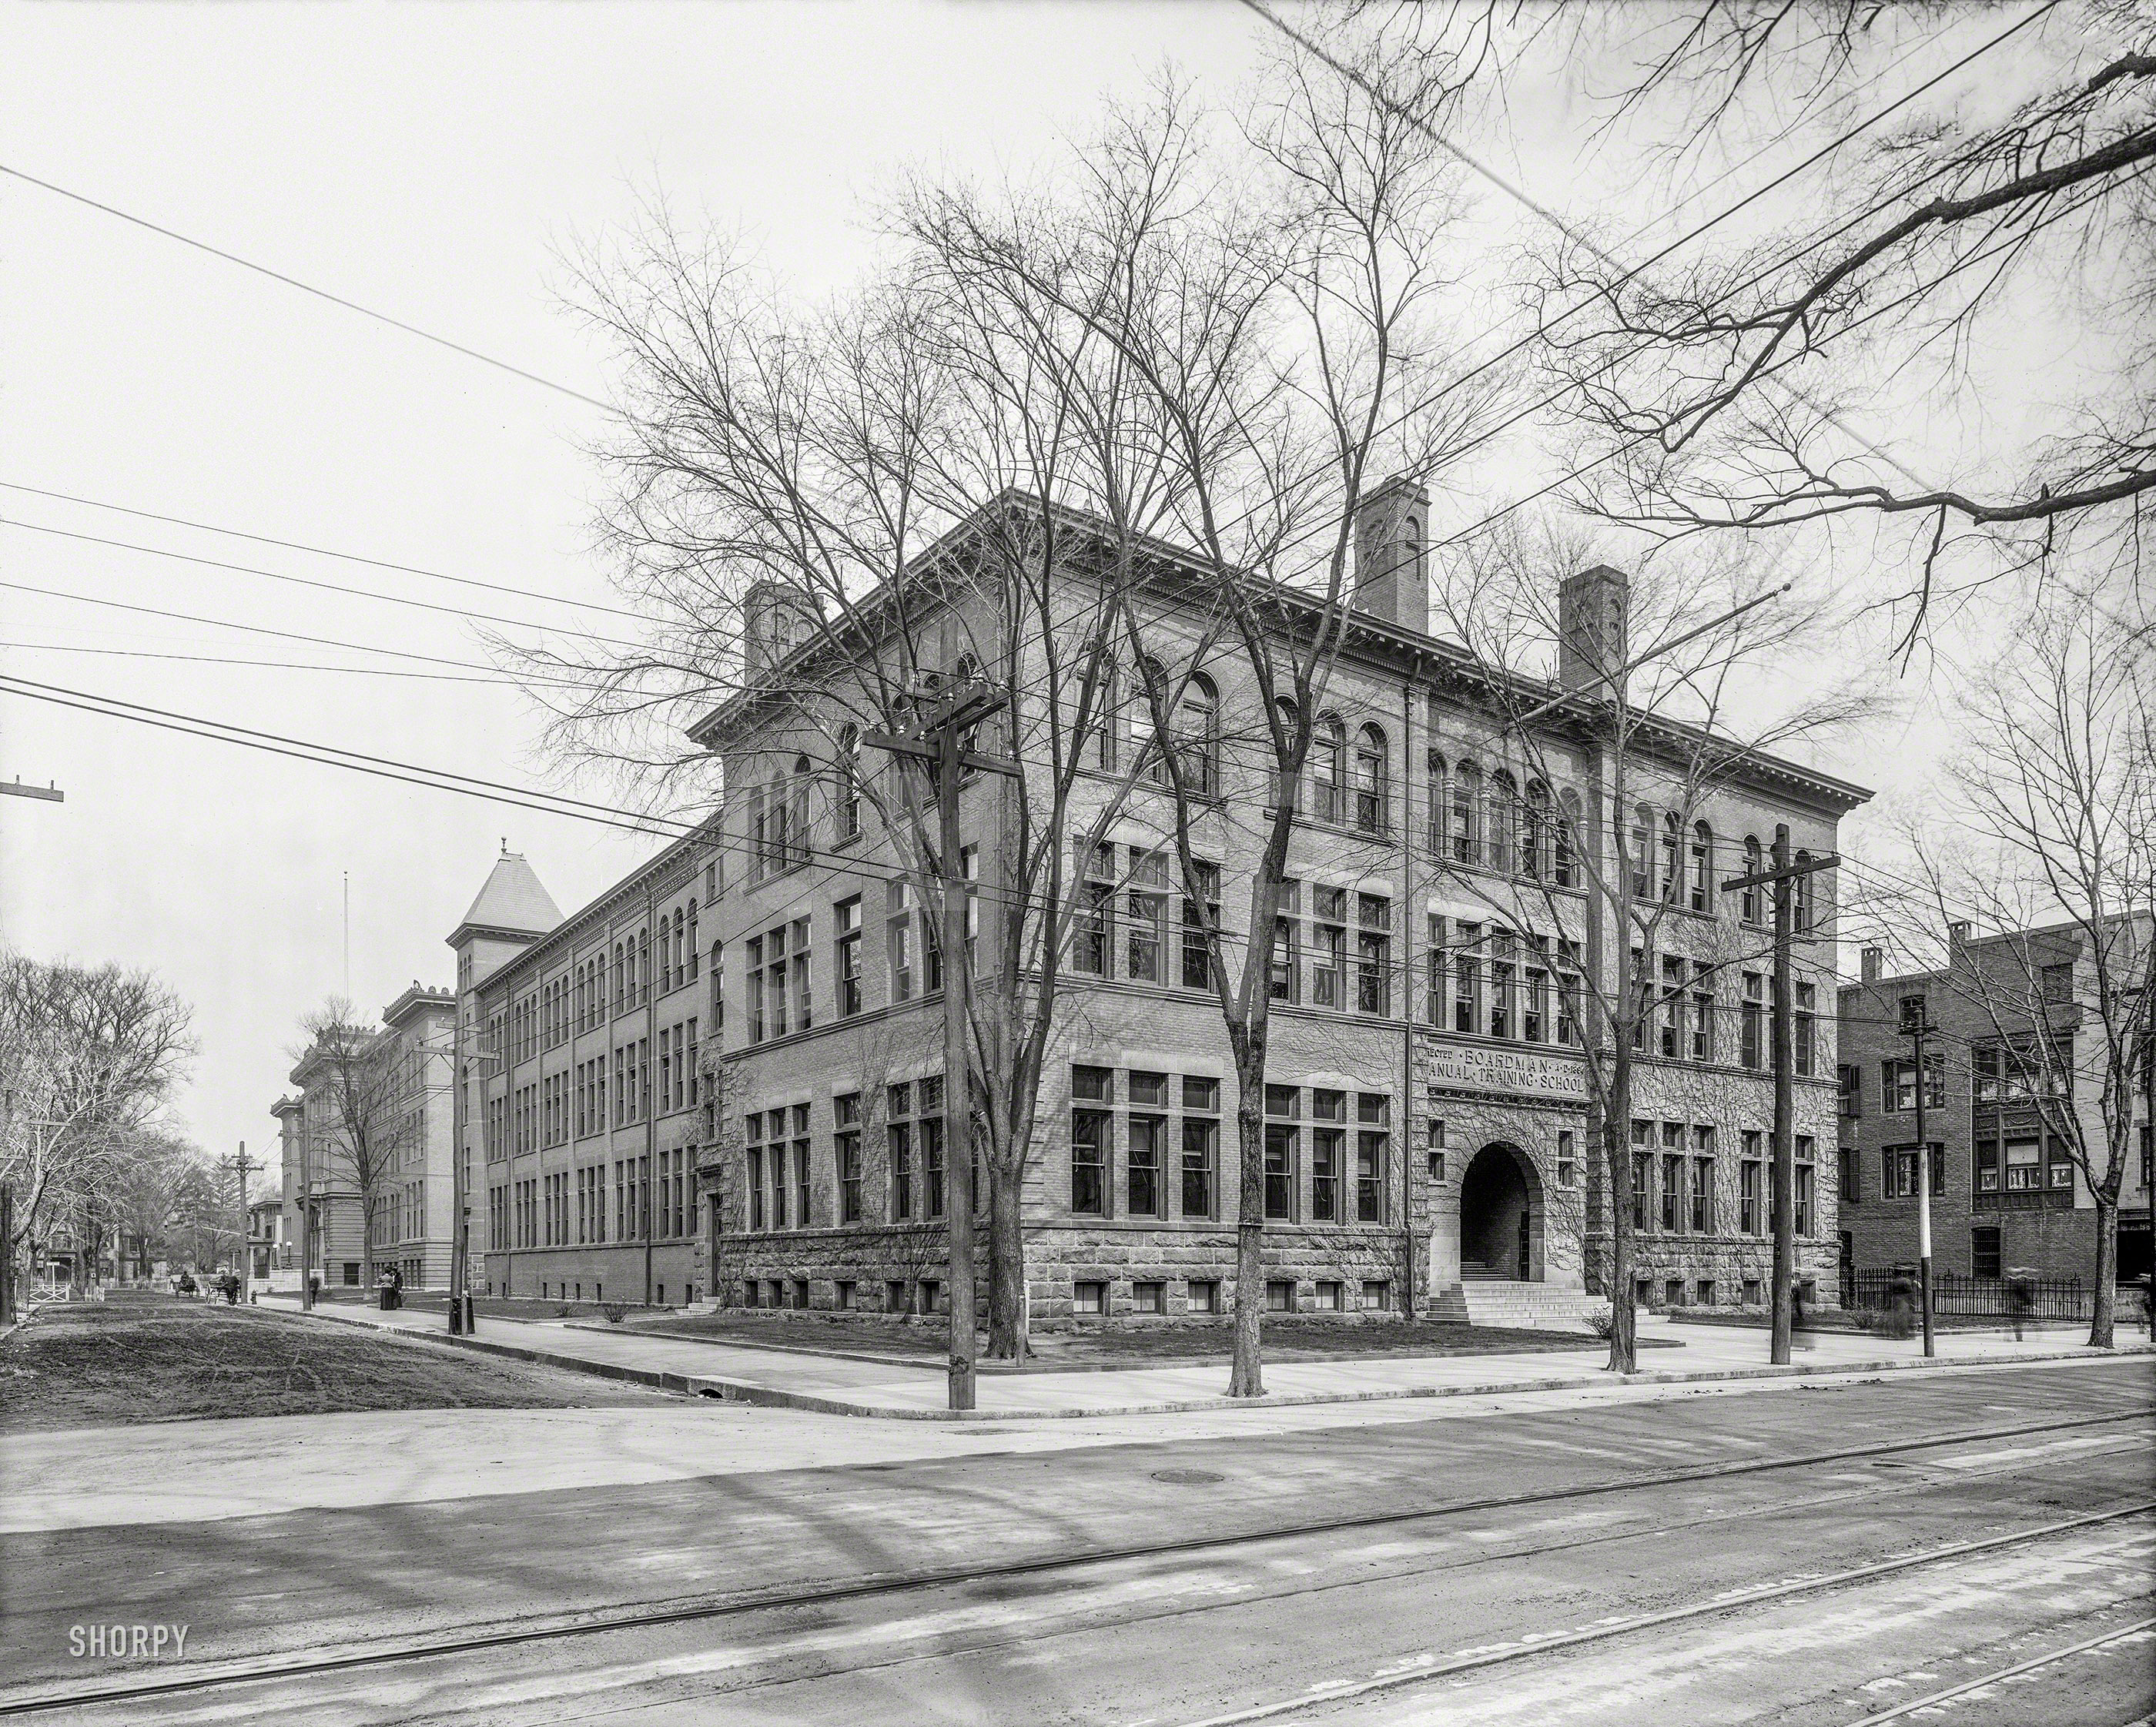 Circa 1900. "Boardman Manual Training School, New Haven, Connecticut." 8x10 inch dry plate glass negative, Detroit Photographic Company. View full size.